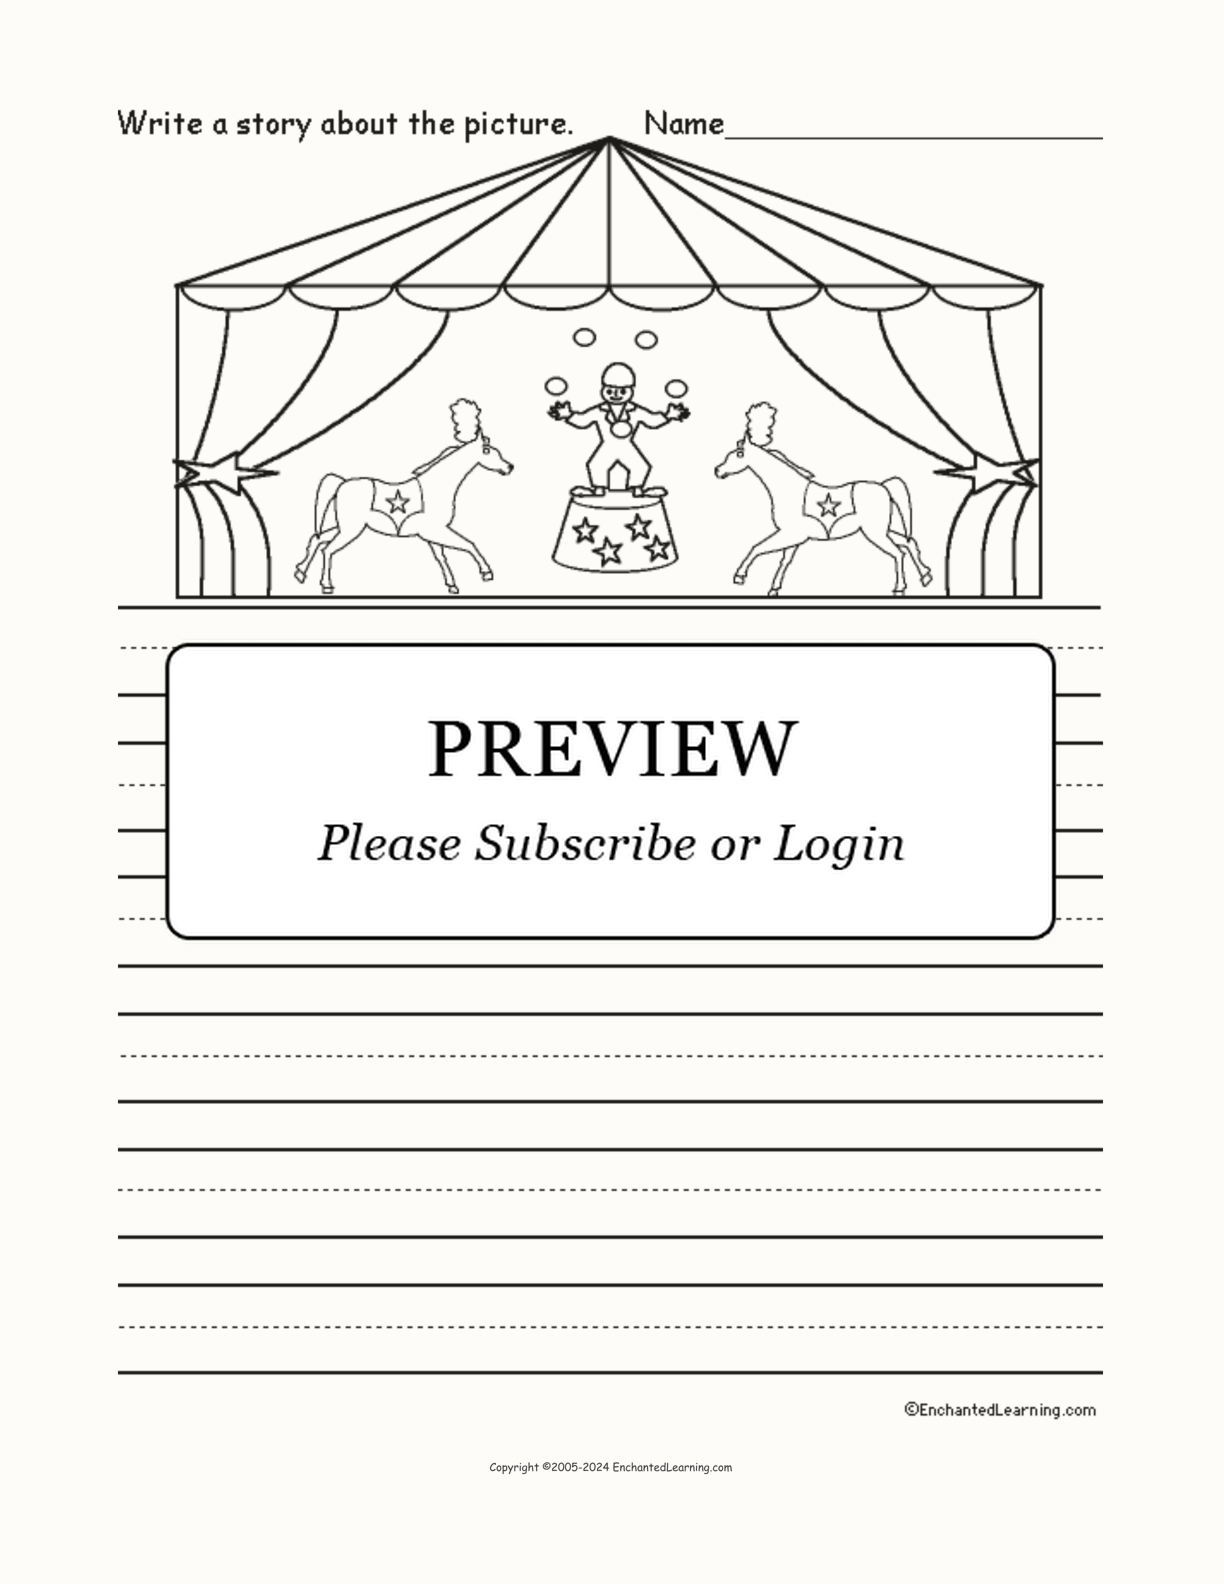 Picture Prompts - Circus Scene interactive worksheet page 1